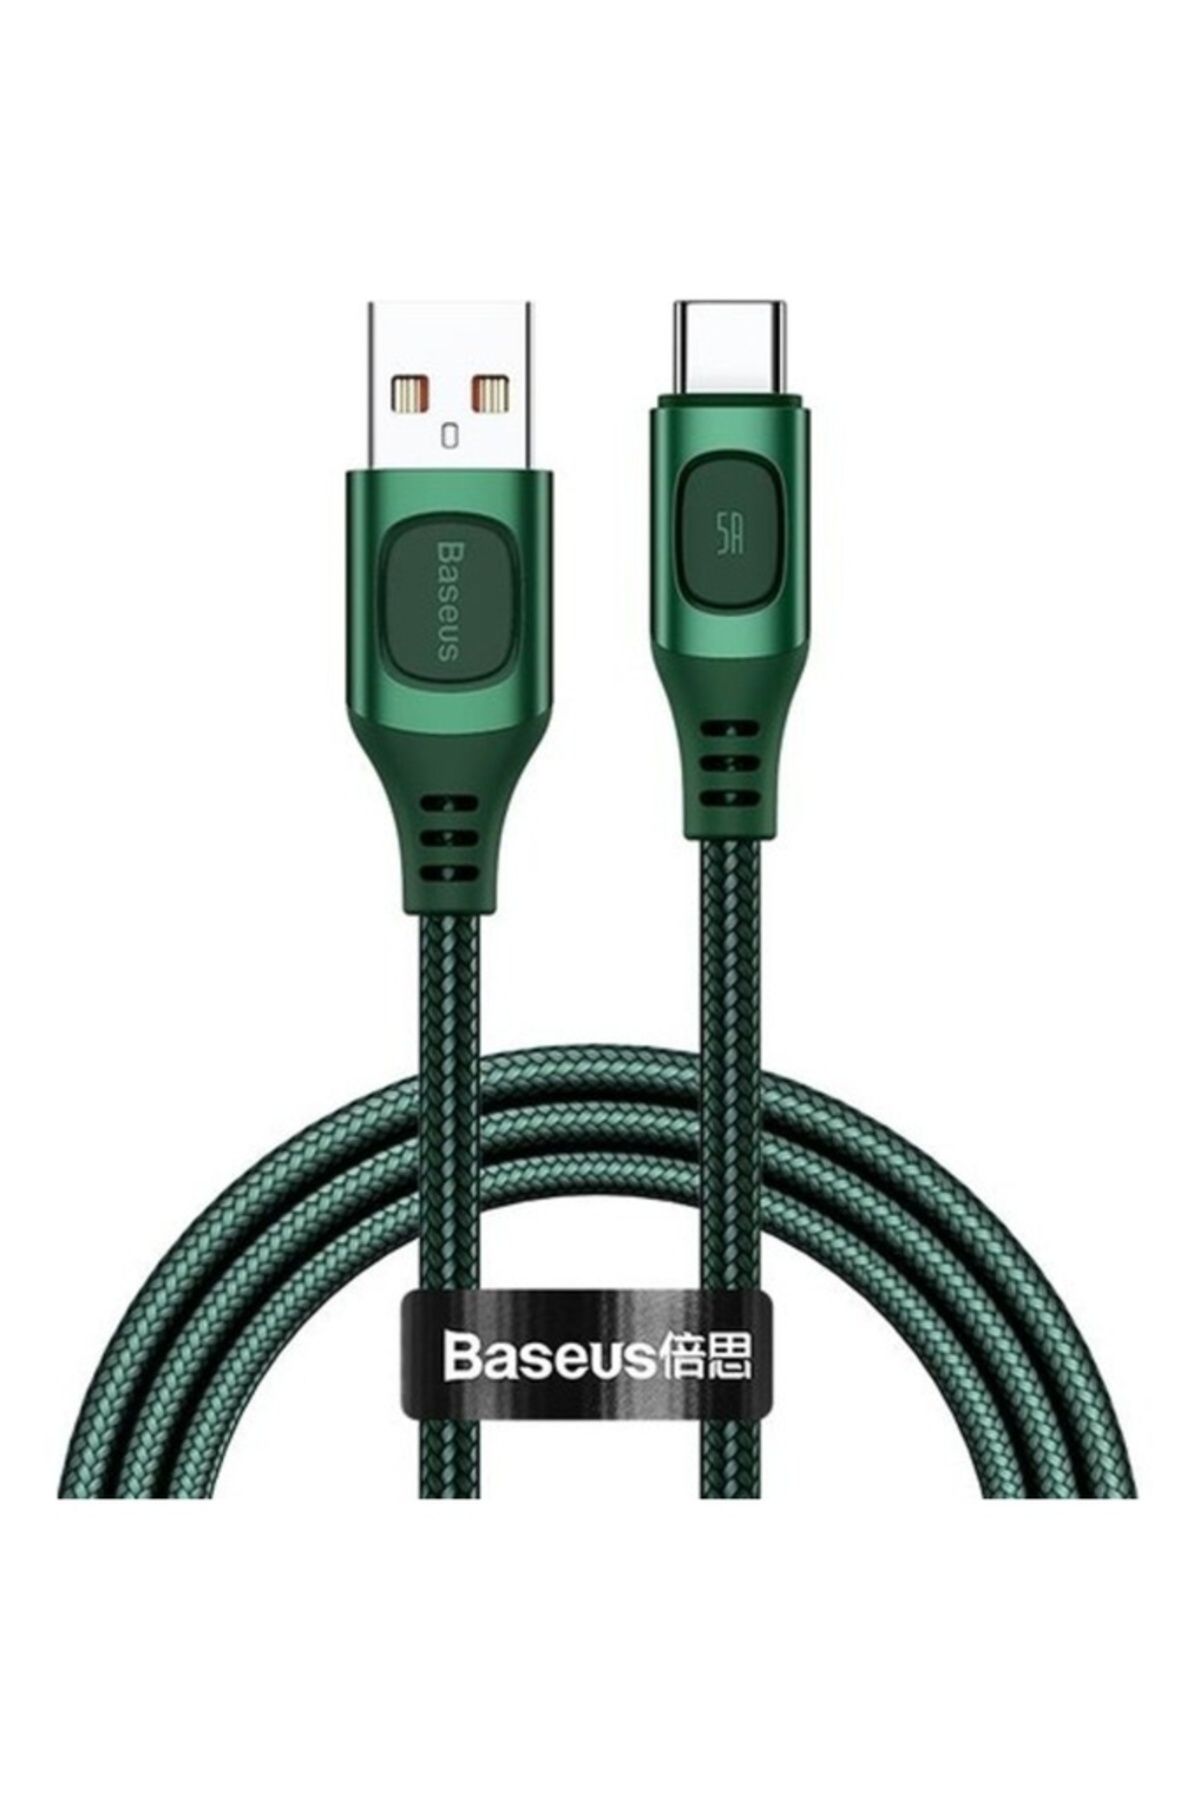 Baseus Flash Multiple Fast Charge Protocols Convertible Fast Charging Cable Usb For Type-c 5a 1 Met